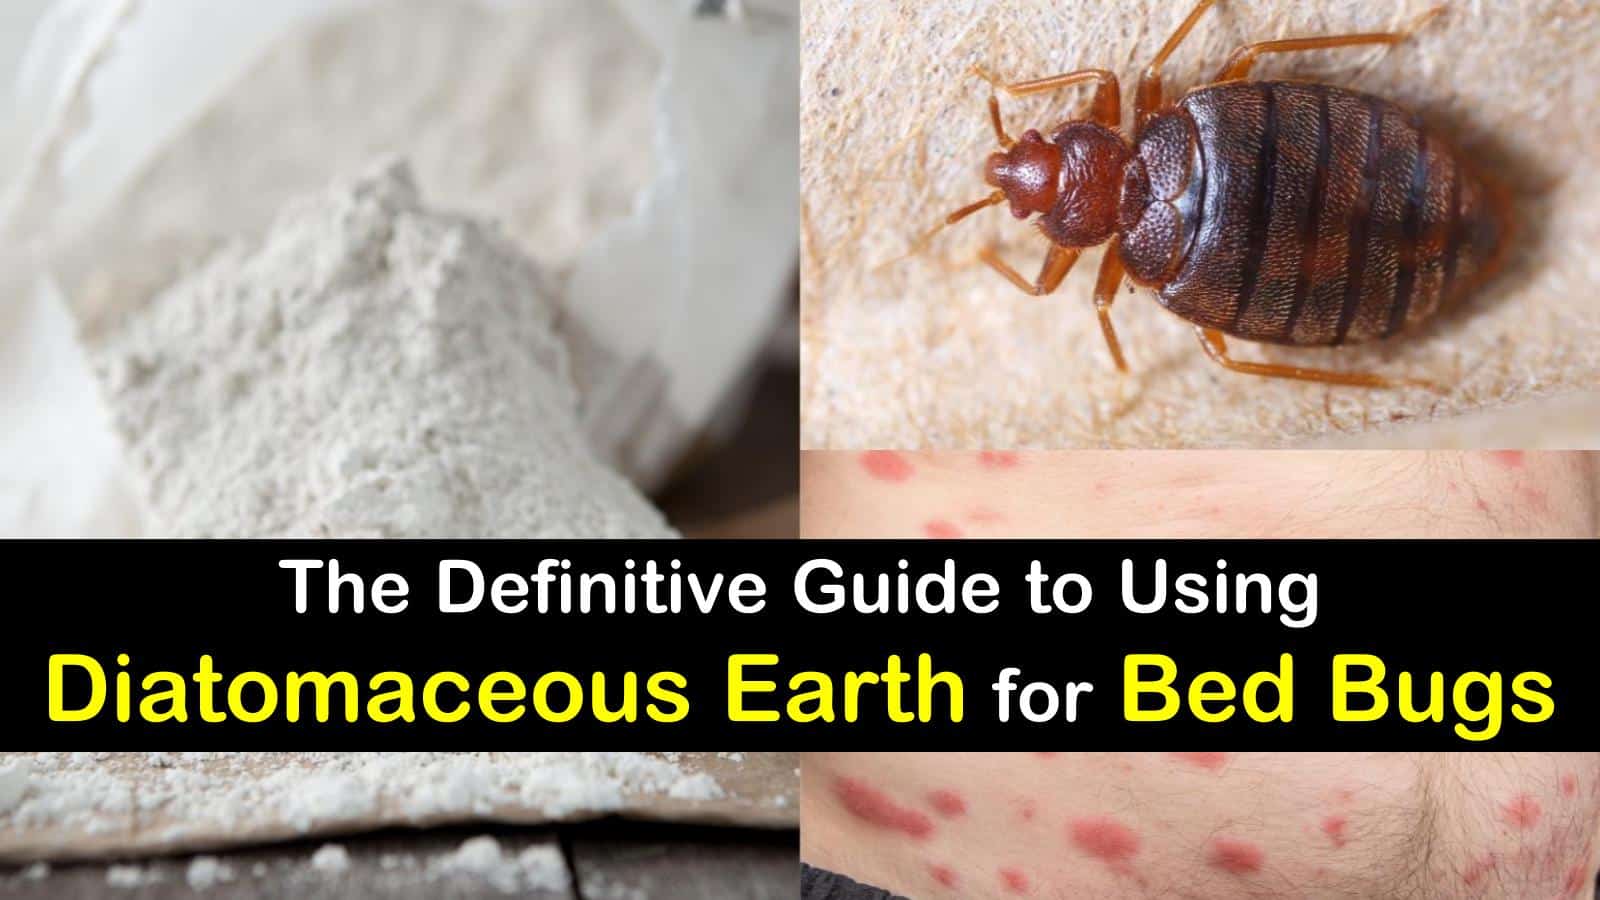 diatomaceous earth for bed bugs titlimg1